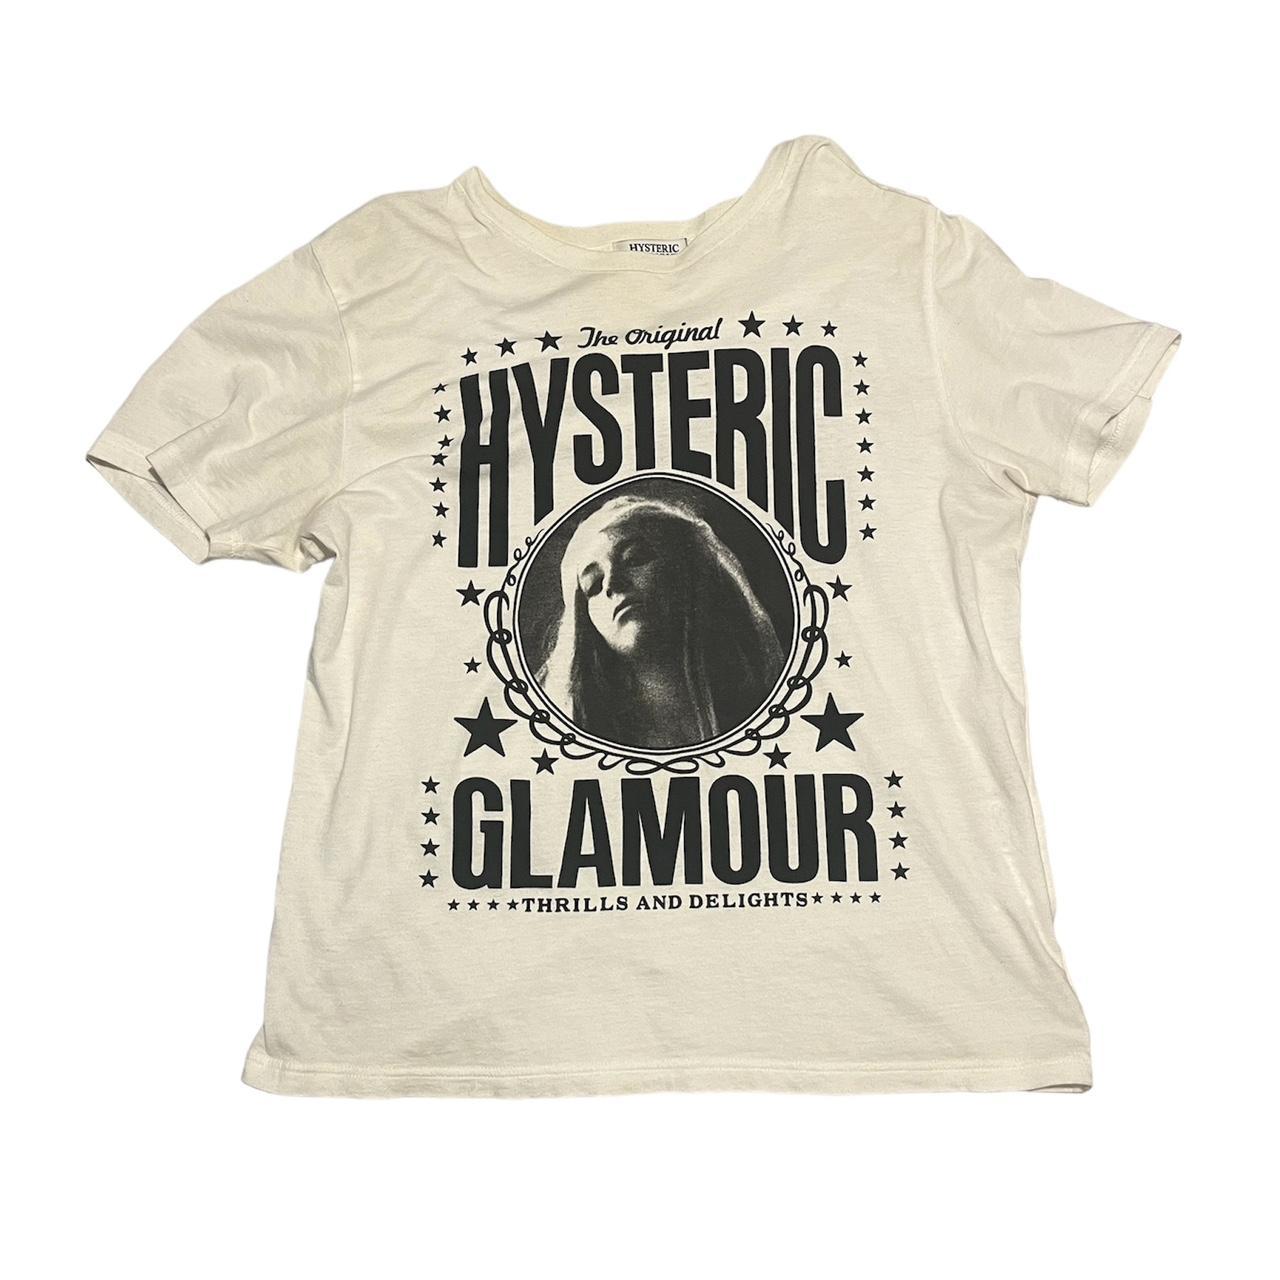 Hysteric Glamour Men's White T-shirt